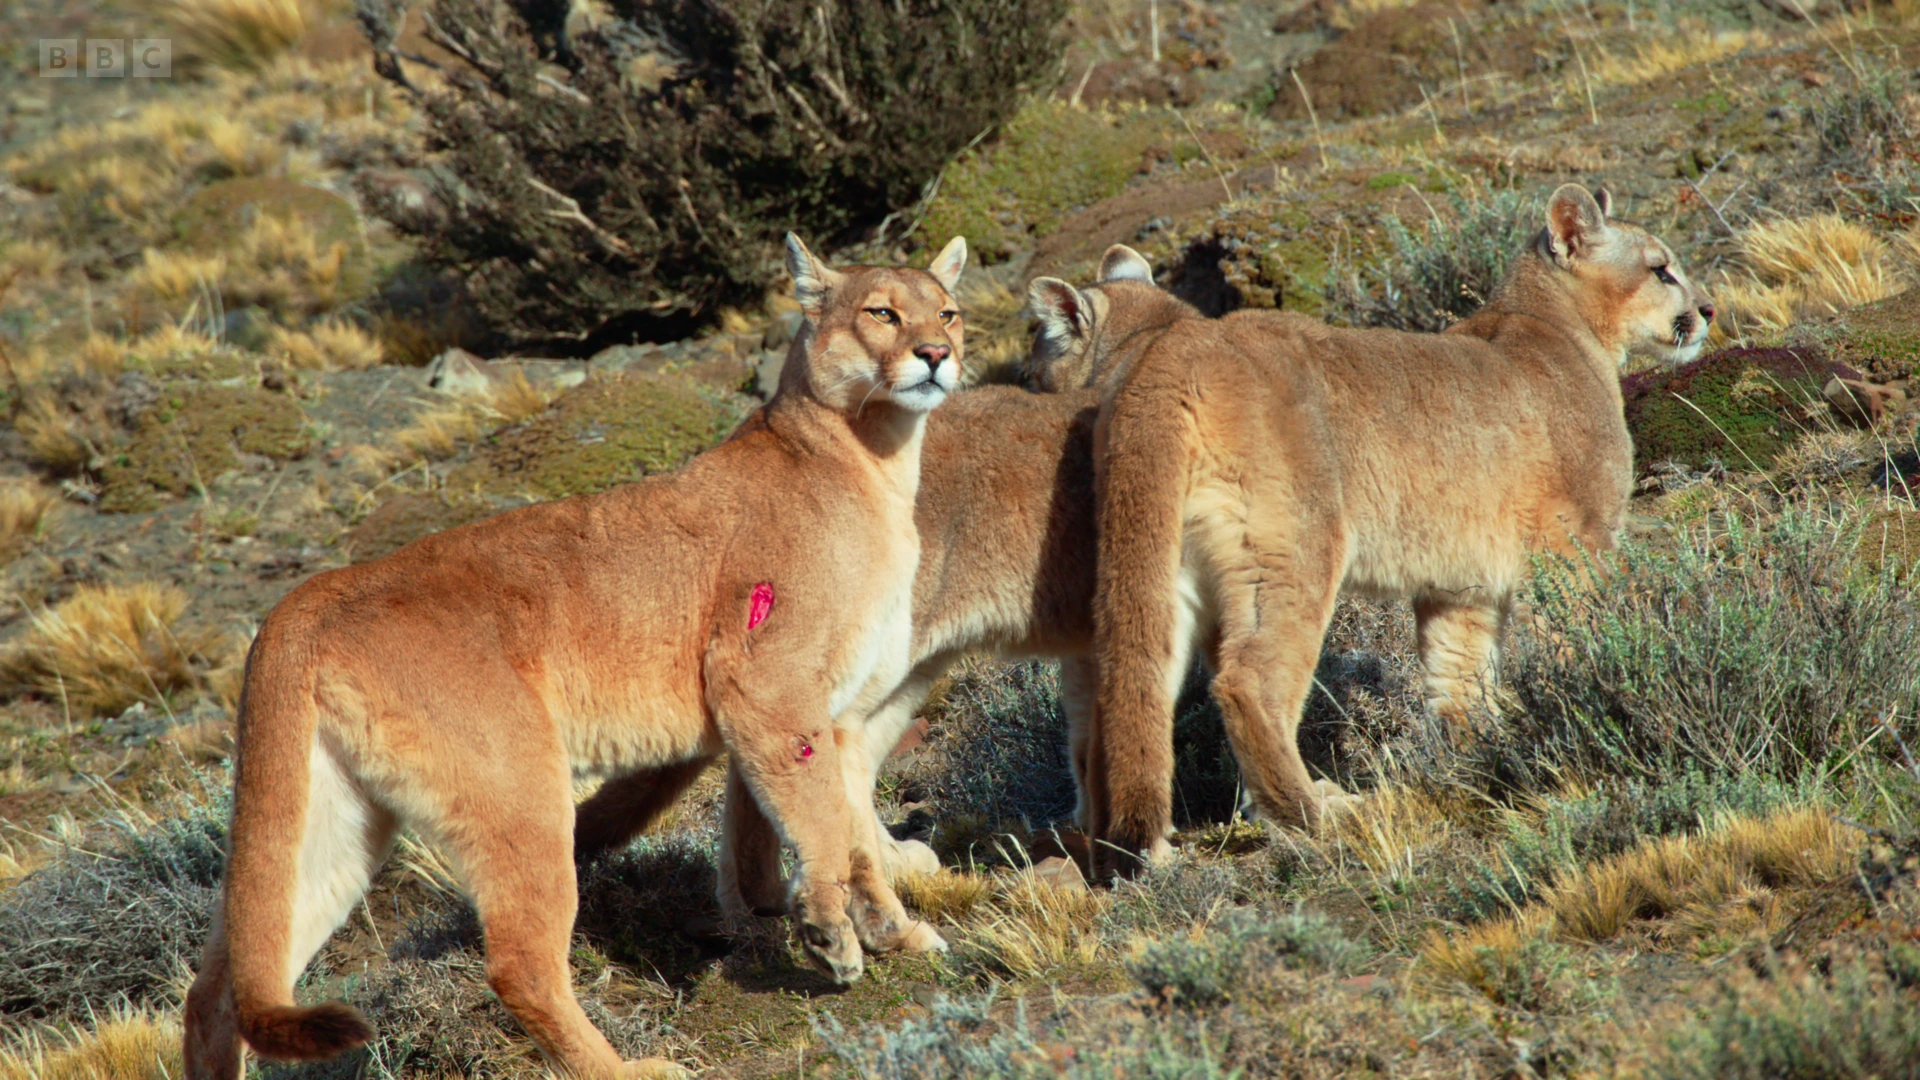 South American cougar (Puma concolor concolor) as shown in Seven Worlds, One Planet - South America